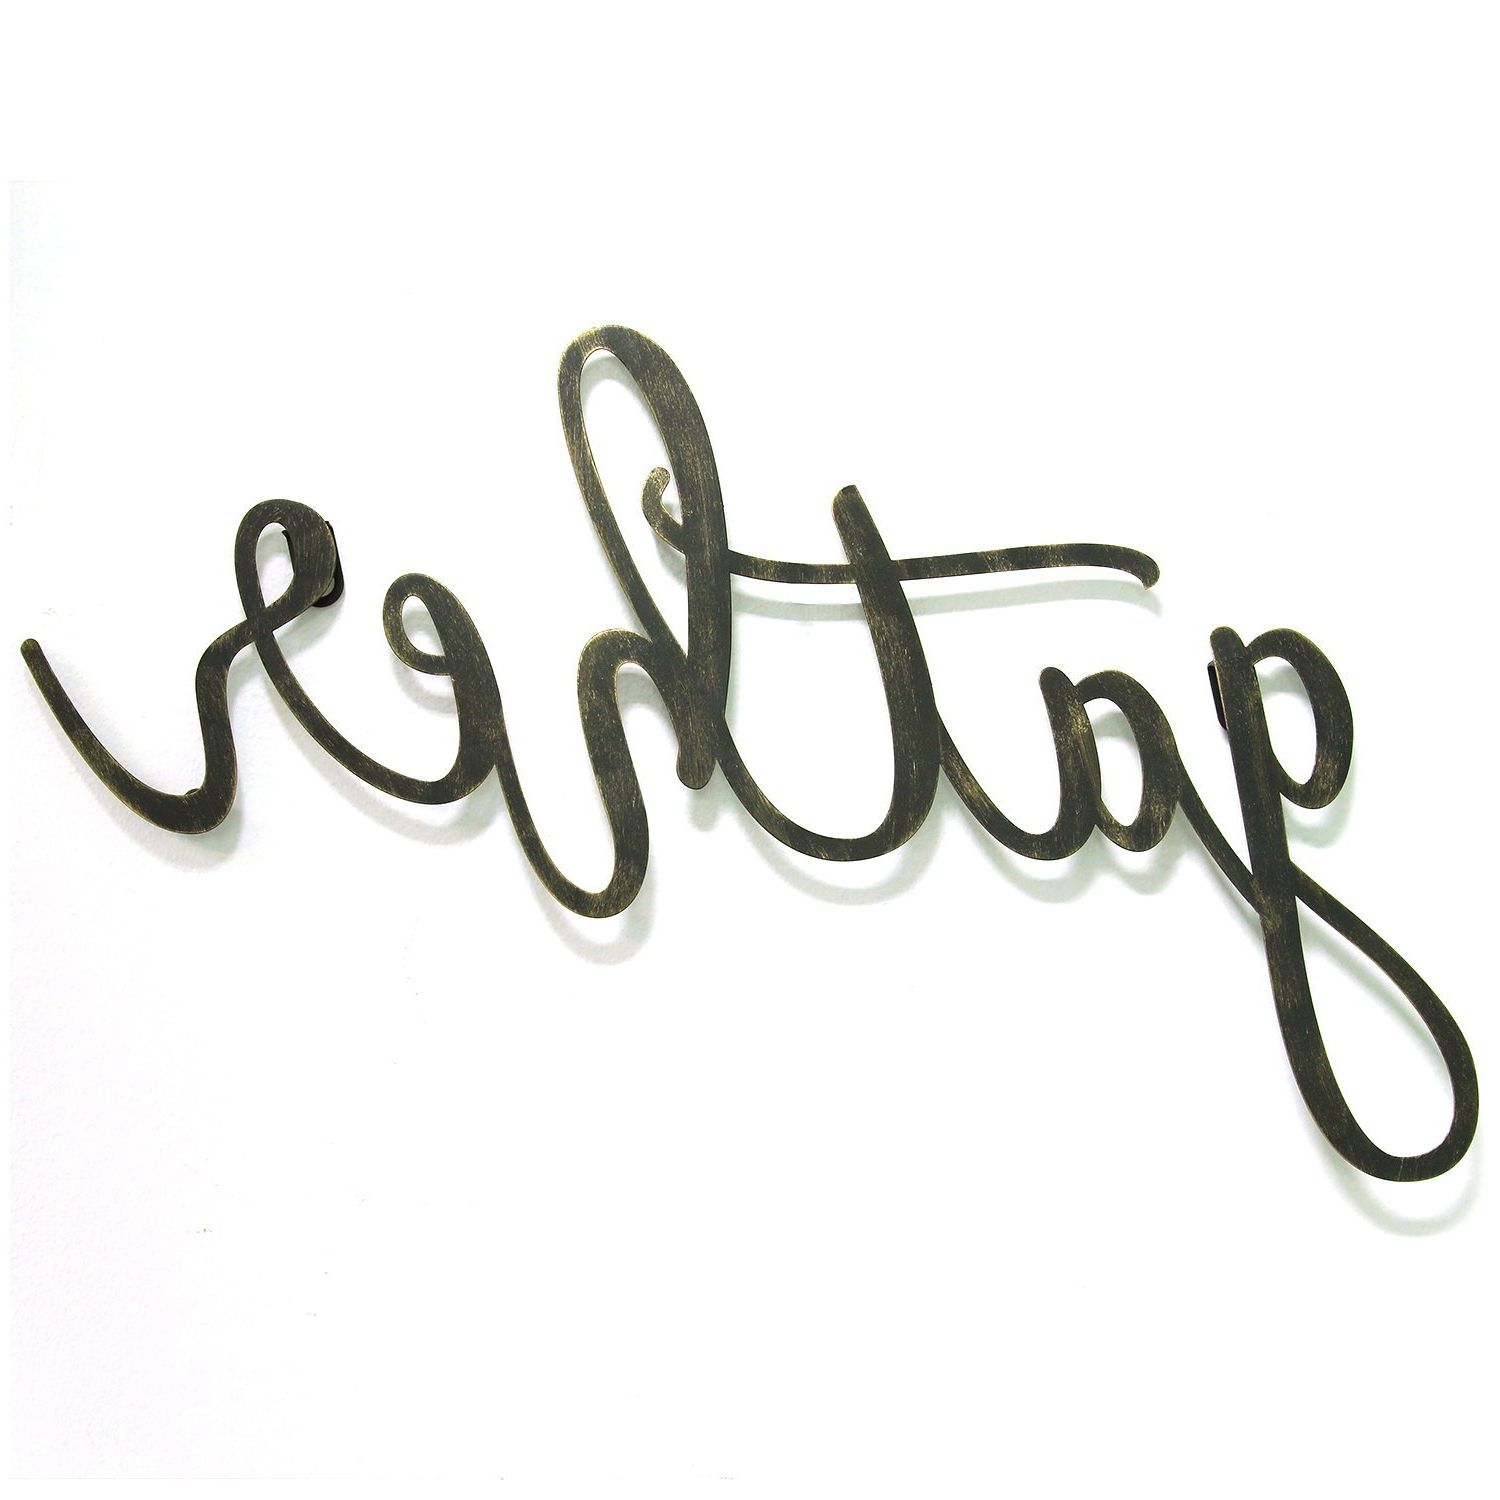 Most Current Choose Happiness 3d Cursive Metal Wall Decor With Regard To Gather Script Wall Décor & Reviews (View 9 of 20)